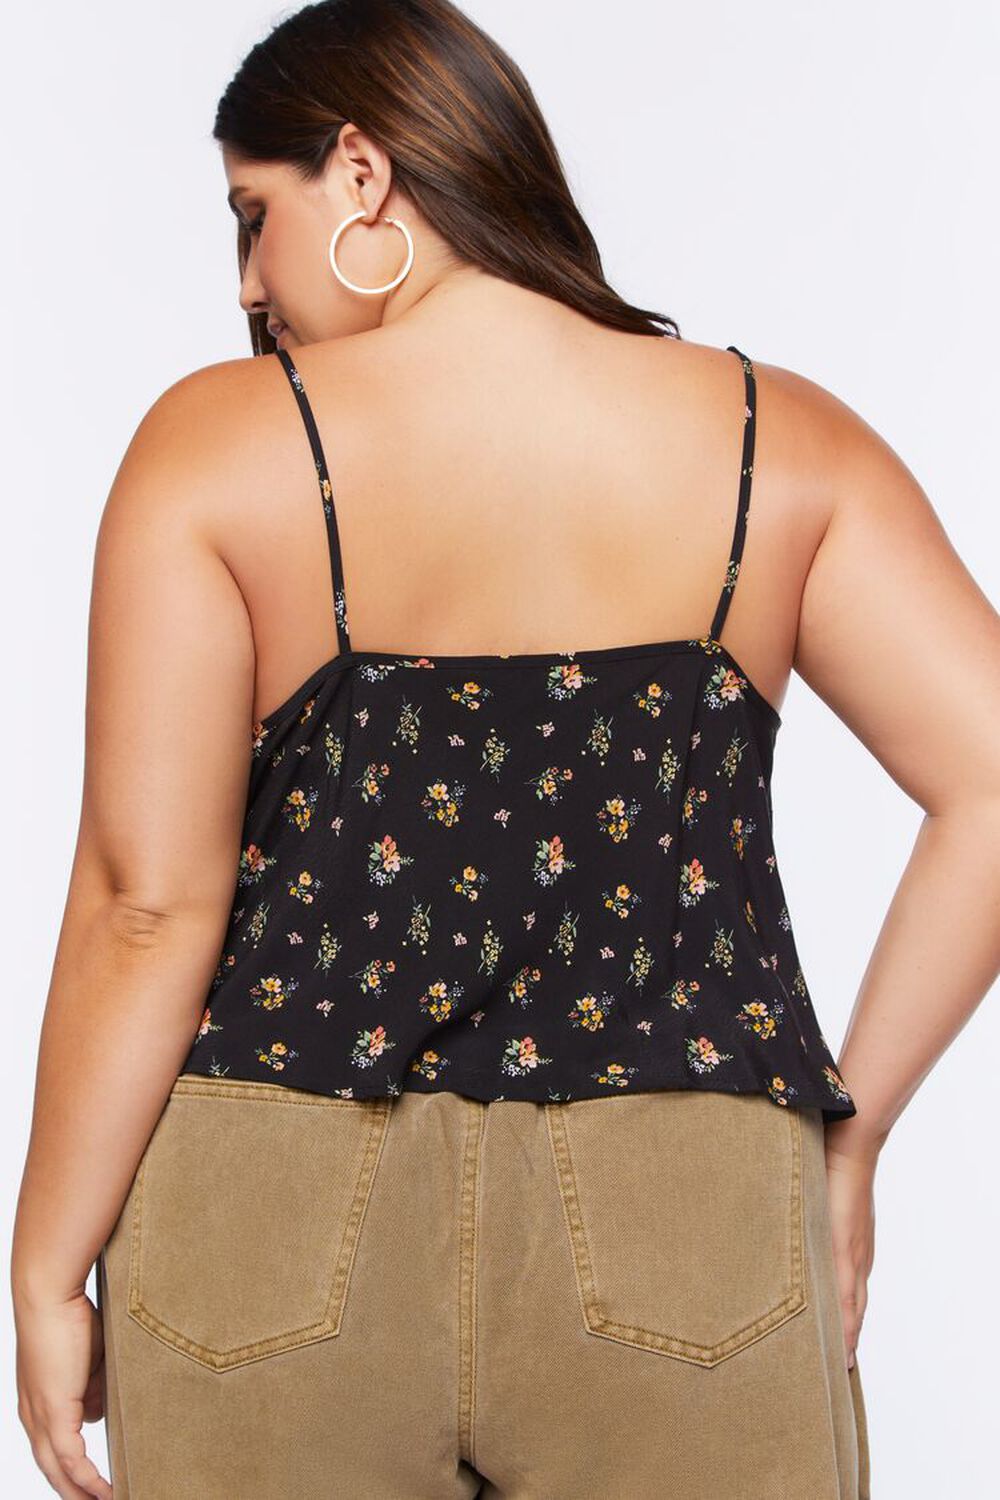 Plus Size Ditsy Floral Print Cami, image 3